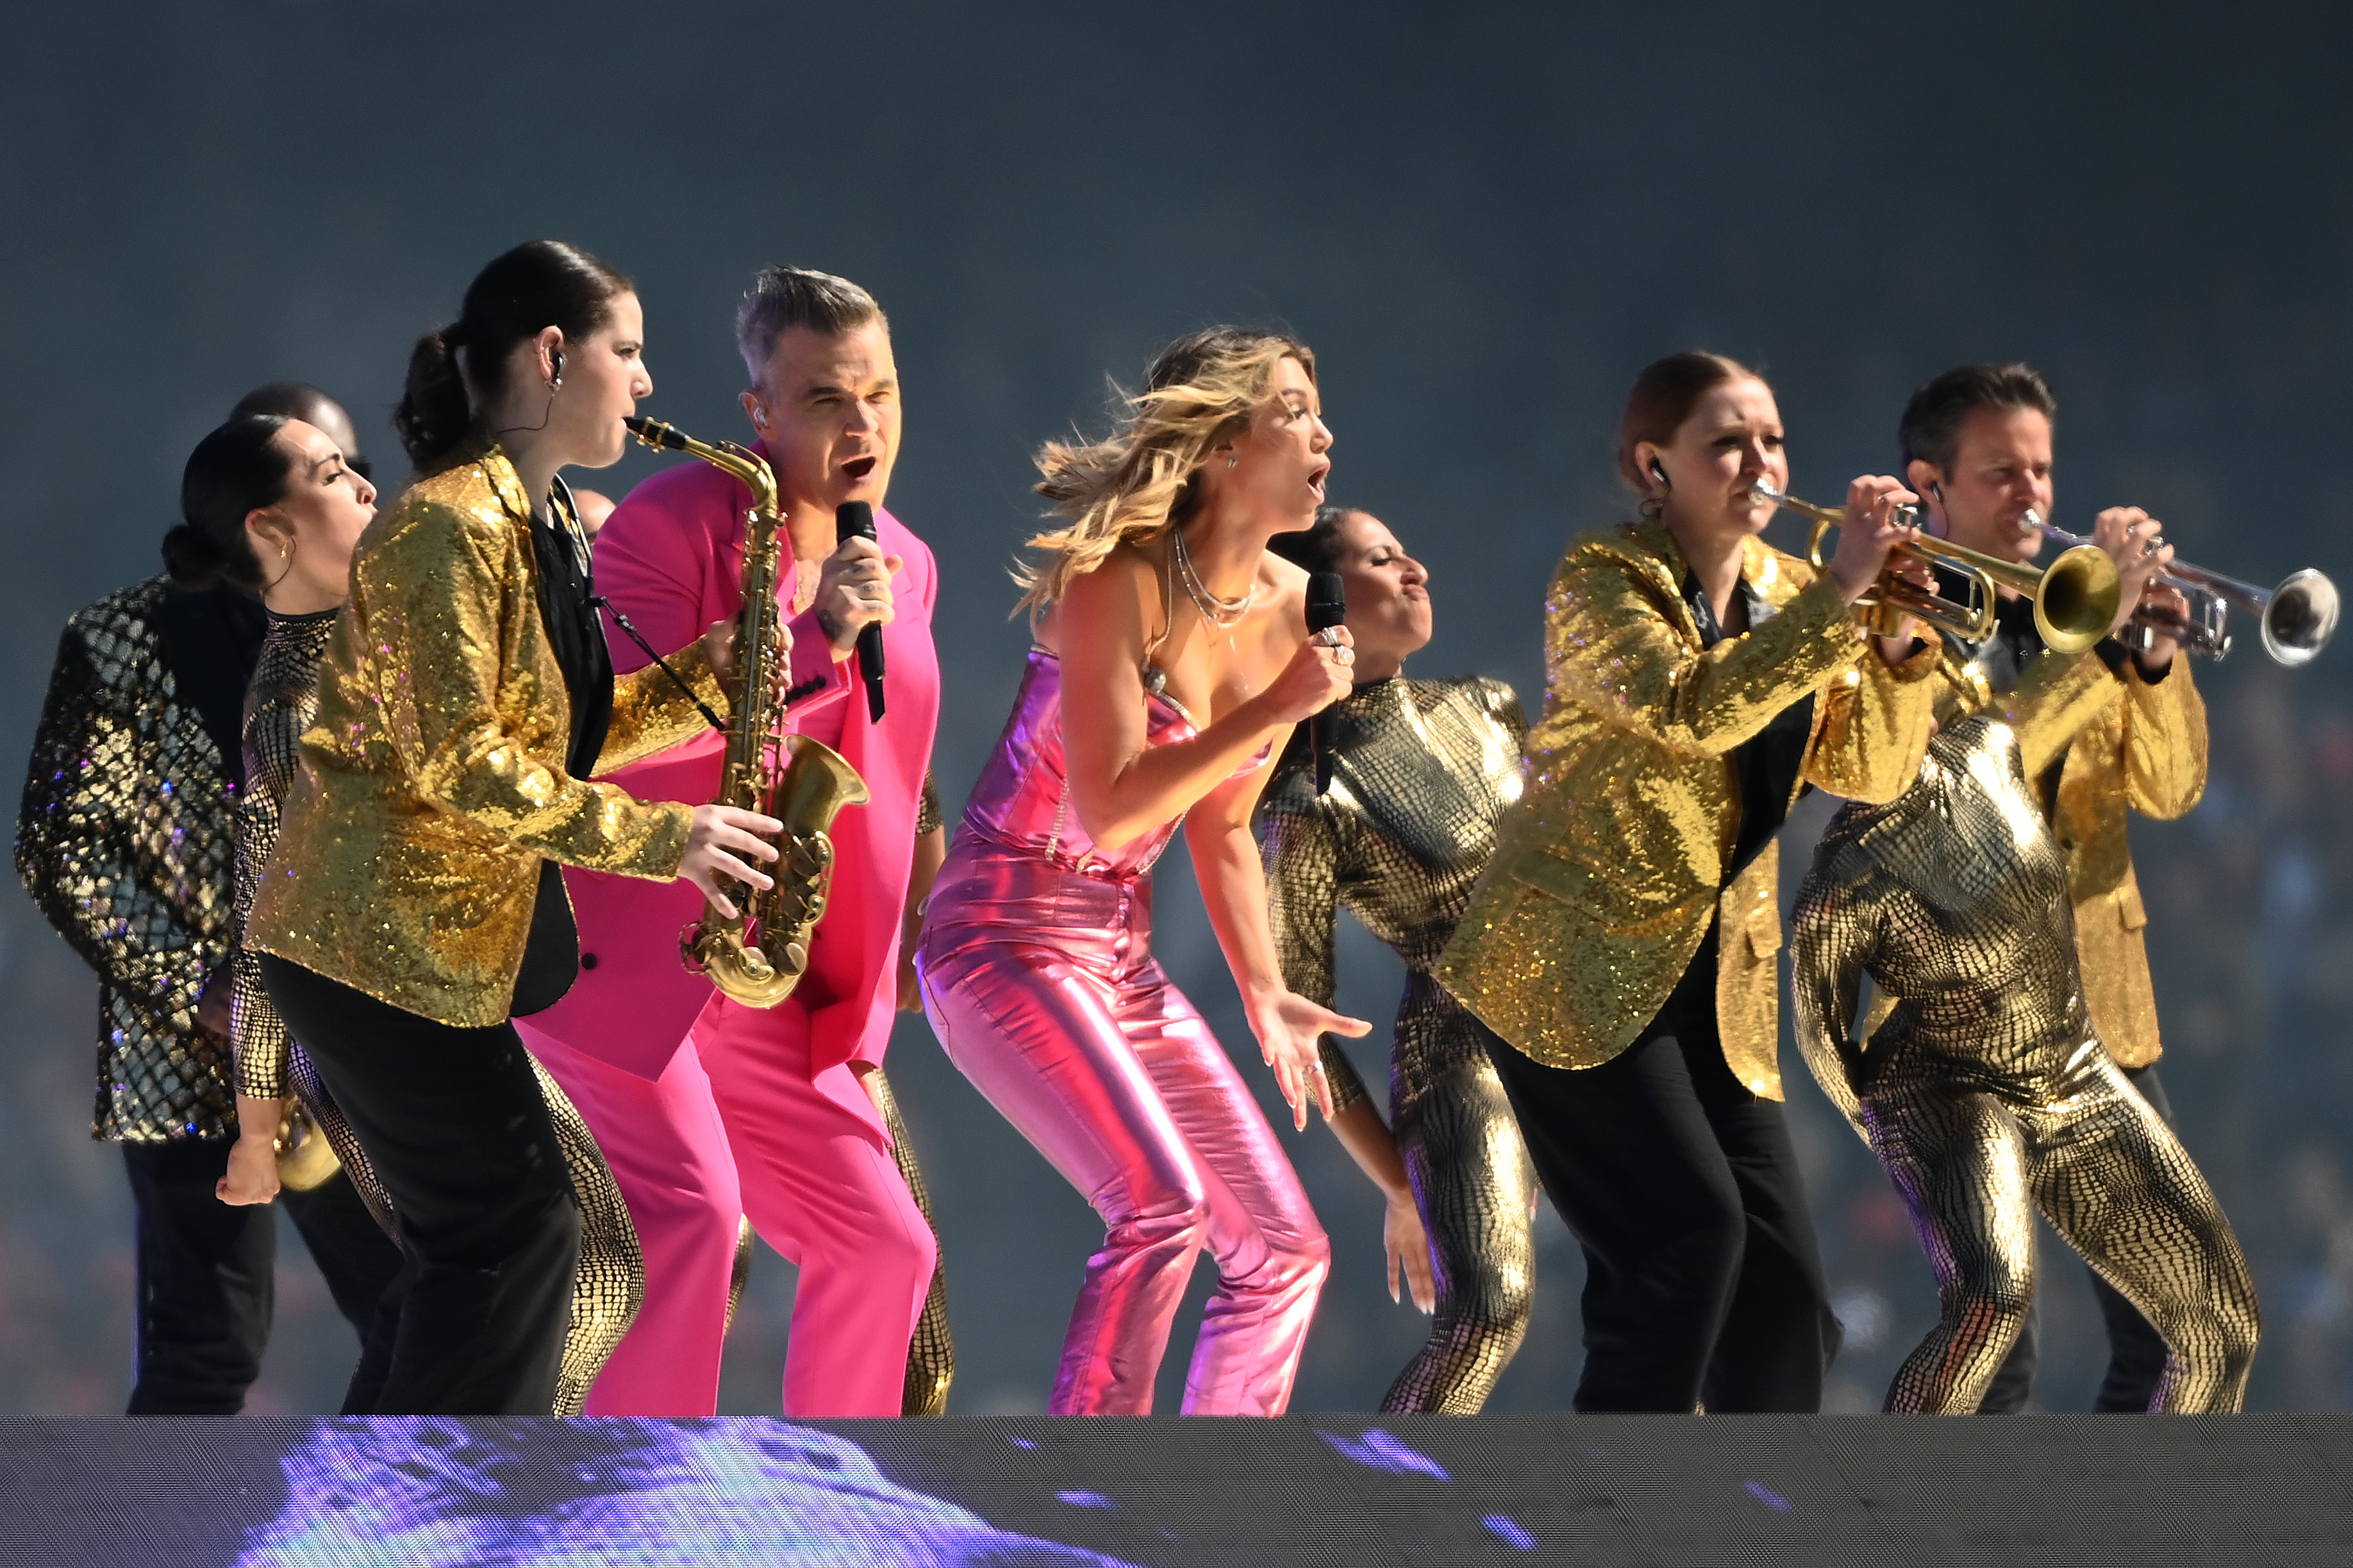 Robbie Williams and Delta Goodrem perform during the 2022 AFL Grand Final match between the Geelong Cats and the Sydney Swans at the Melbourne Cricket Ground on September 24, 2022 in Melbourne, Australia. (Photo by Quinn Rooney/Getty Images)